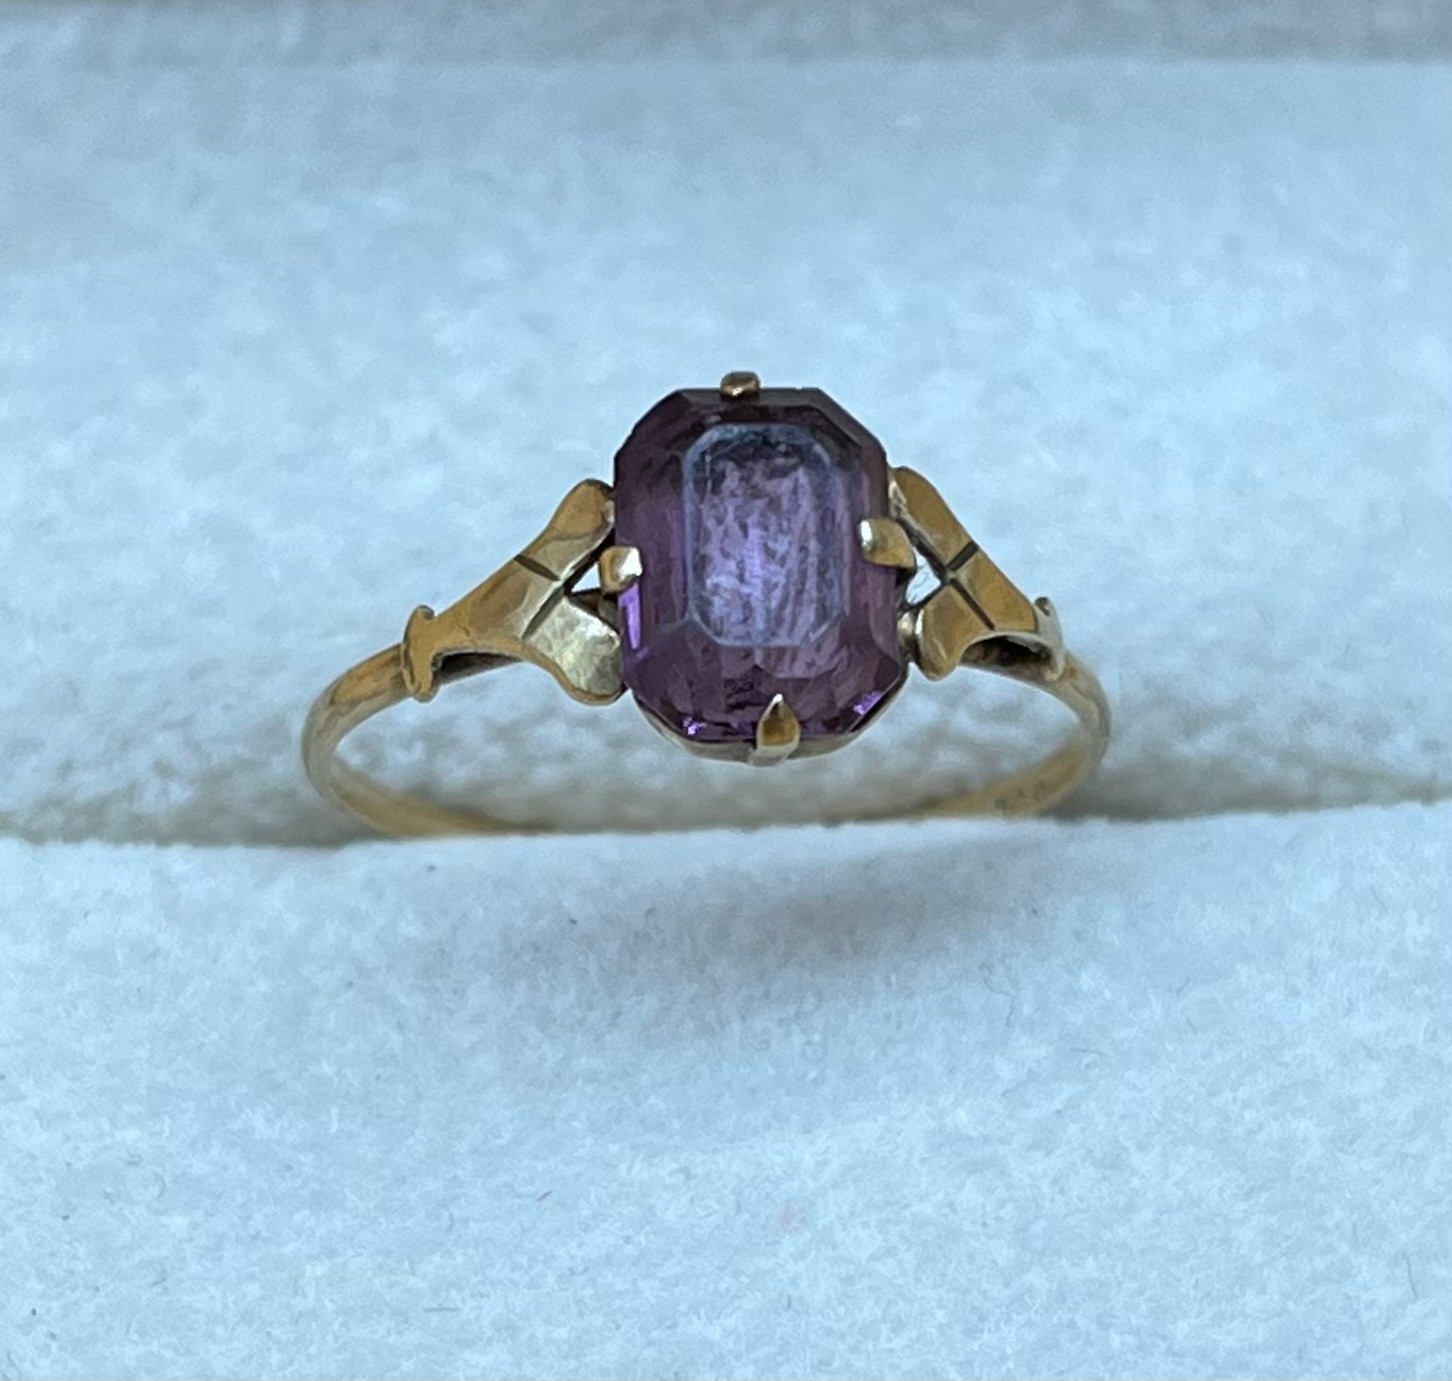 9ct gold and purple stone ring, together with antique 9ct gold necklace. [3.87grams] [Ring size Q]